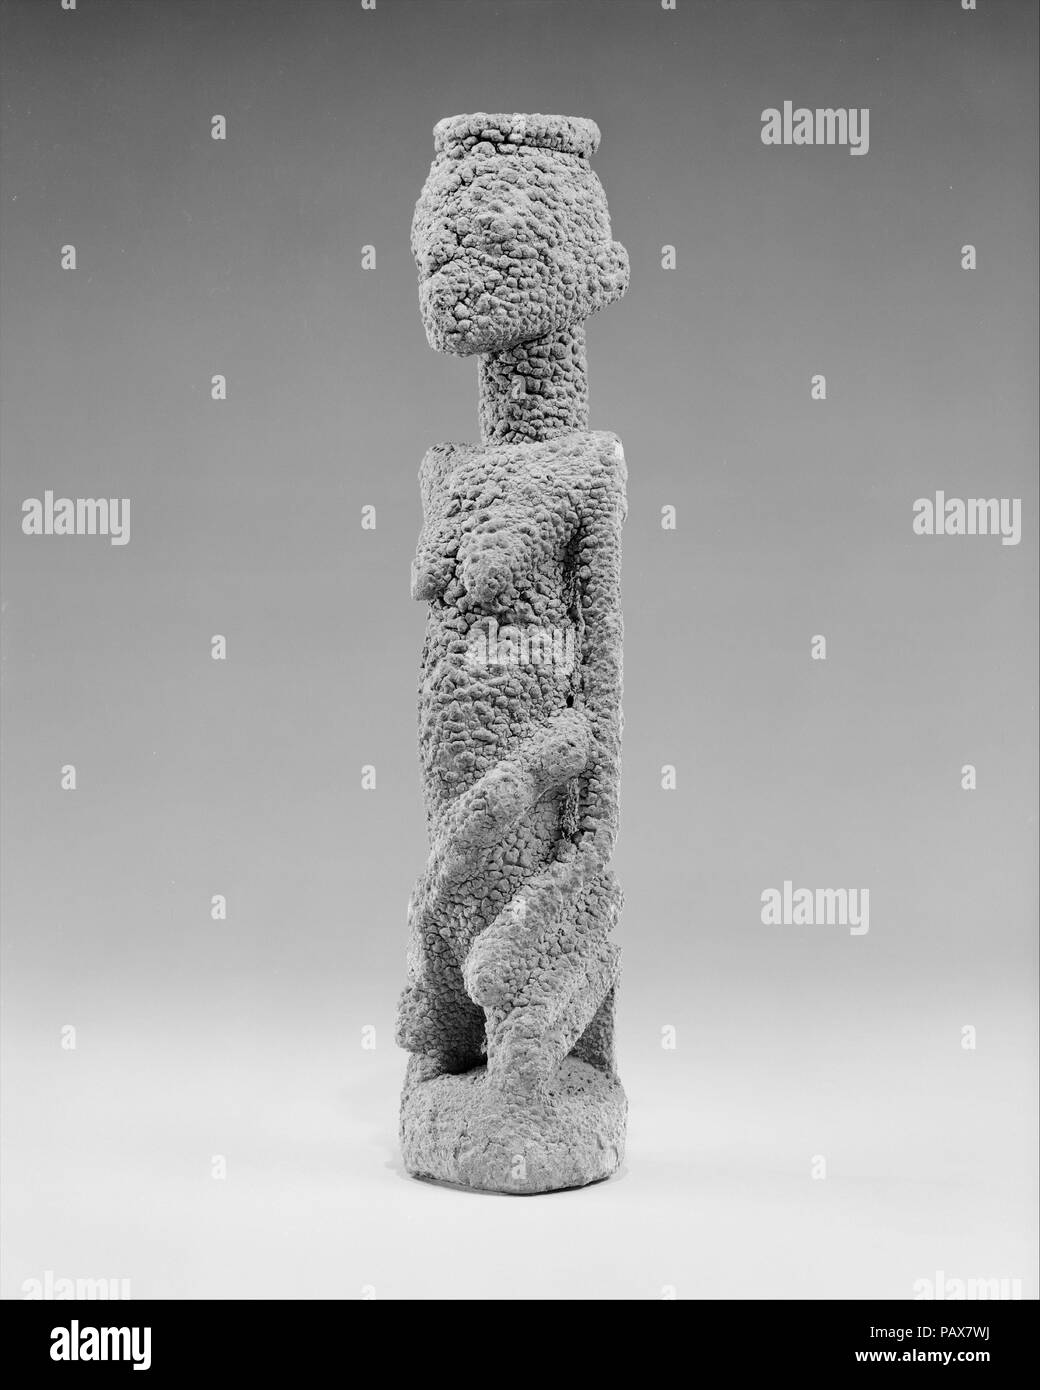 Kneeling Female Figure with Three Children. Culture: Dogon or Tellem  peoples (?). Dimensions: H. 13 x W. 3 x D. 2 5/8 in. (33 x 7.6 x 6.7 cm). Date: 15th- 19th century (?).  The subject of this intimately-sized sculpture is a kneeling female figure. The woman is shown sitting on her knees with flexed feet and hands resting on her thighs. The posture's grounded and meditative quality is accentuated by the compact rendition of the lower body whose center of gravity is concentrated around the circular base. In contrast to the slim lower limbs, the sculptor elongated and enlarged the figure's tor Stock Photo